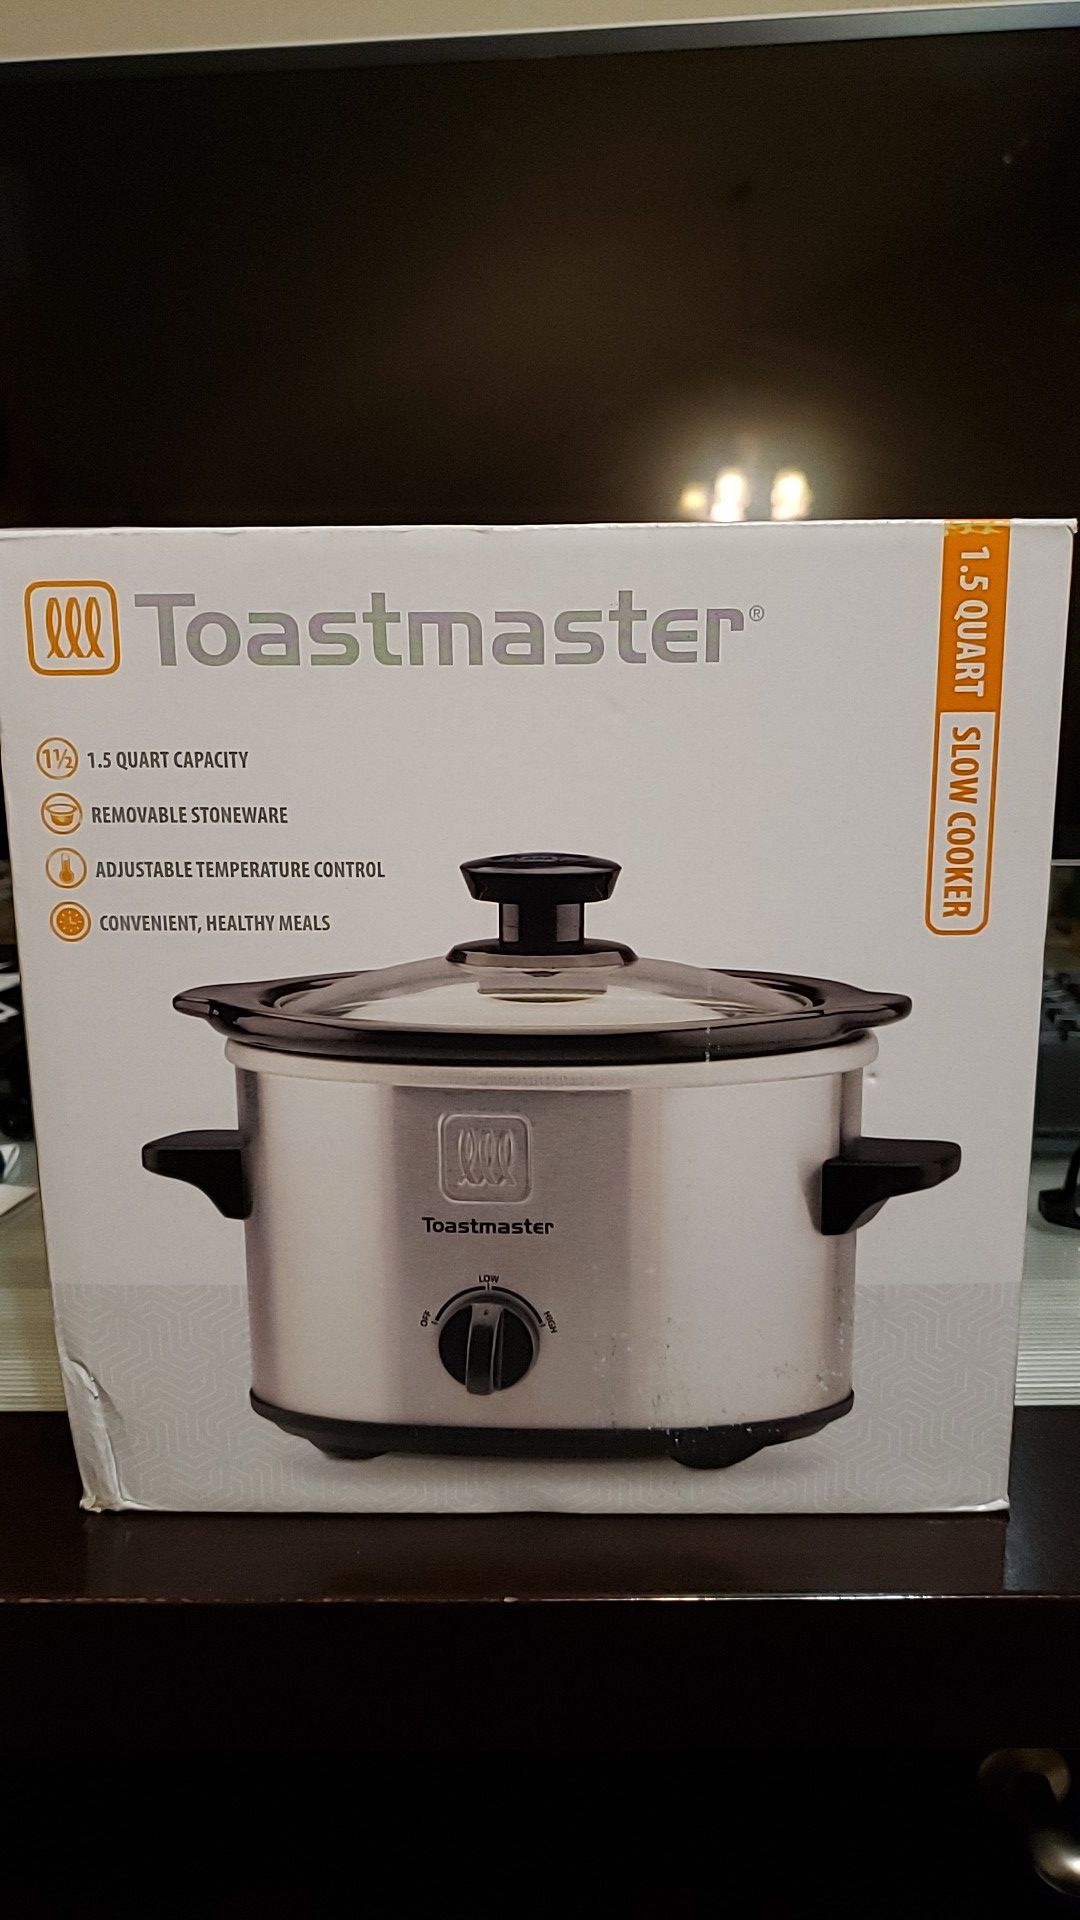 Toastmaster 1.5 Quart Slow Cooker- Brand New Never Opened